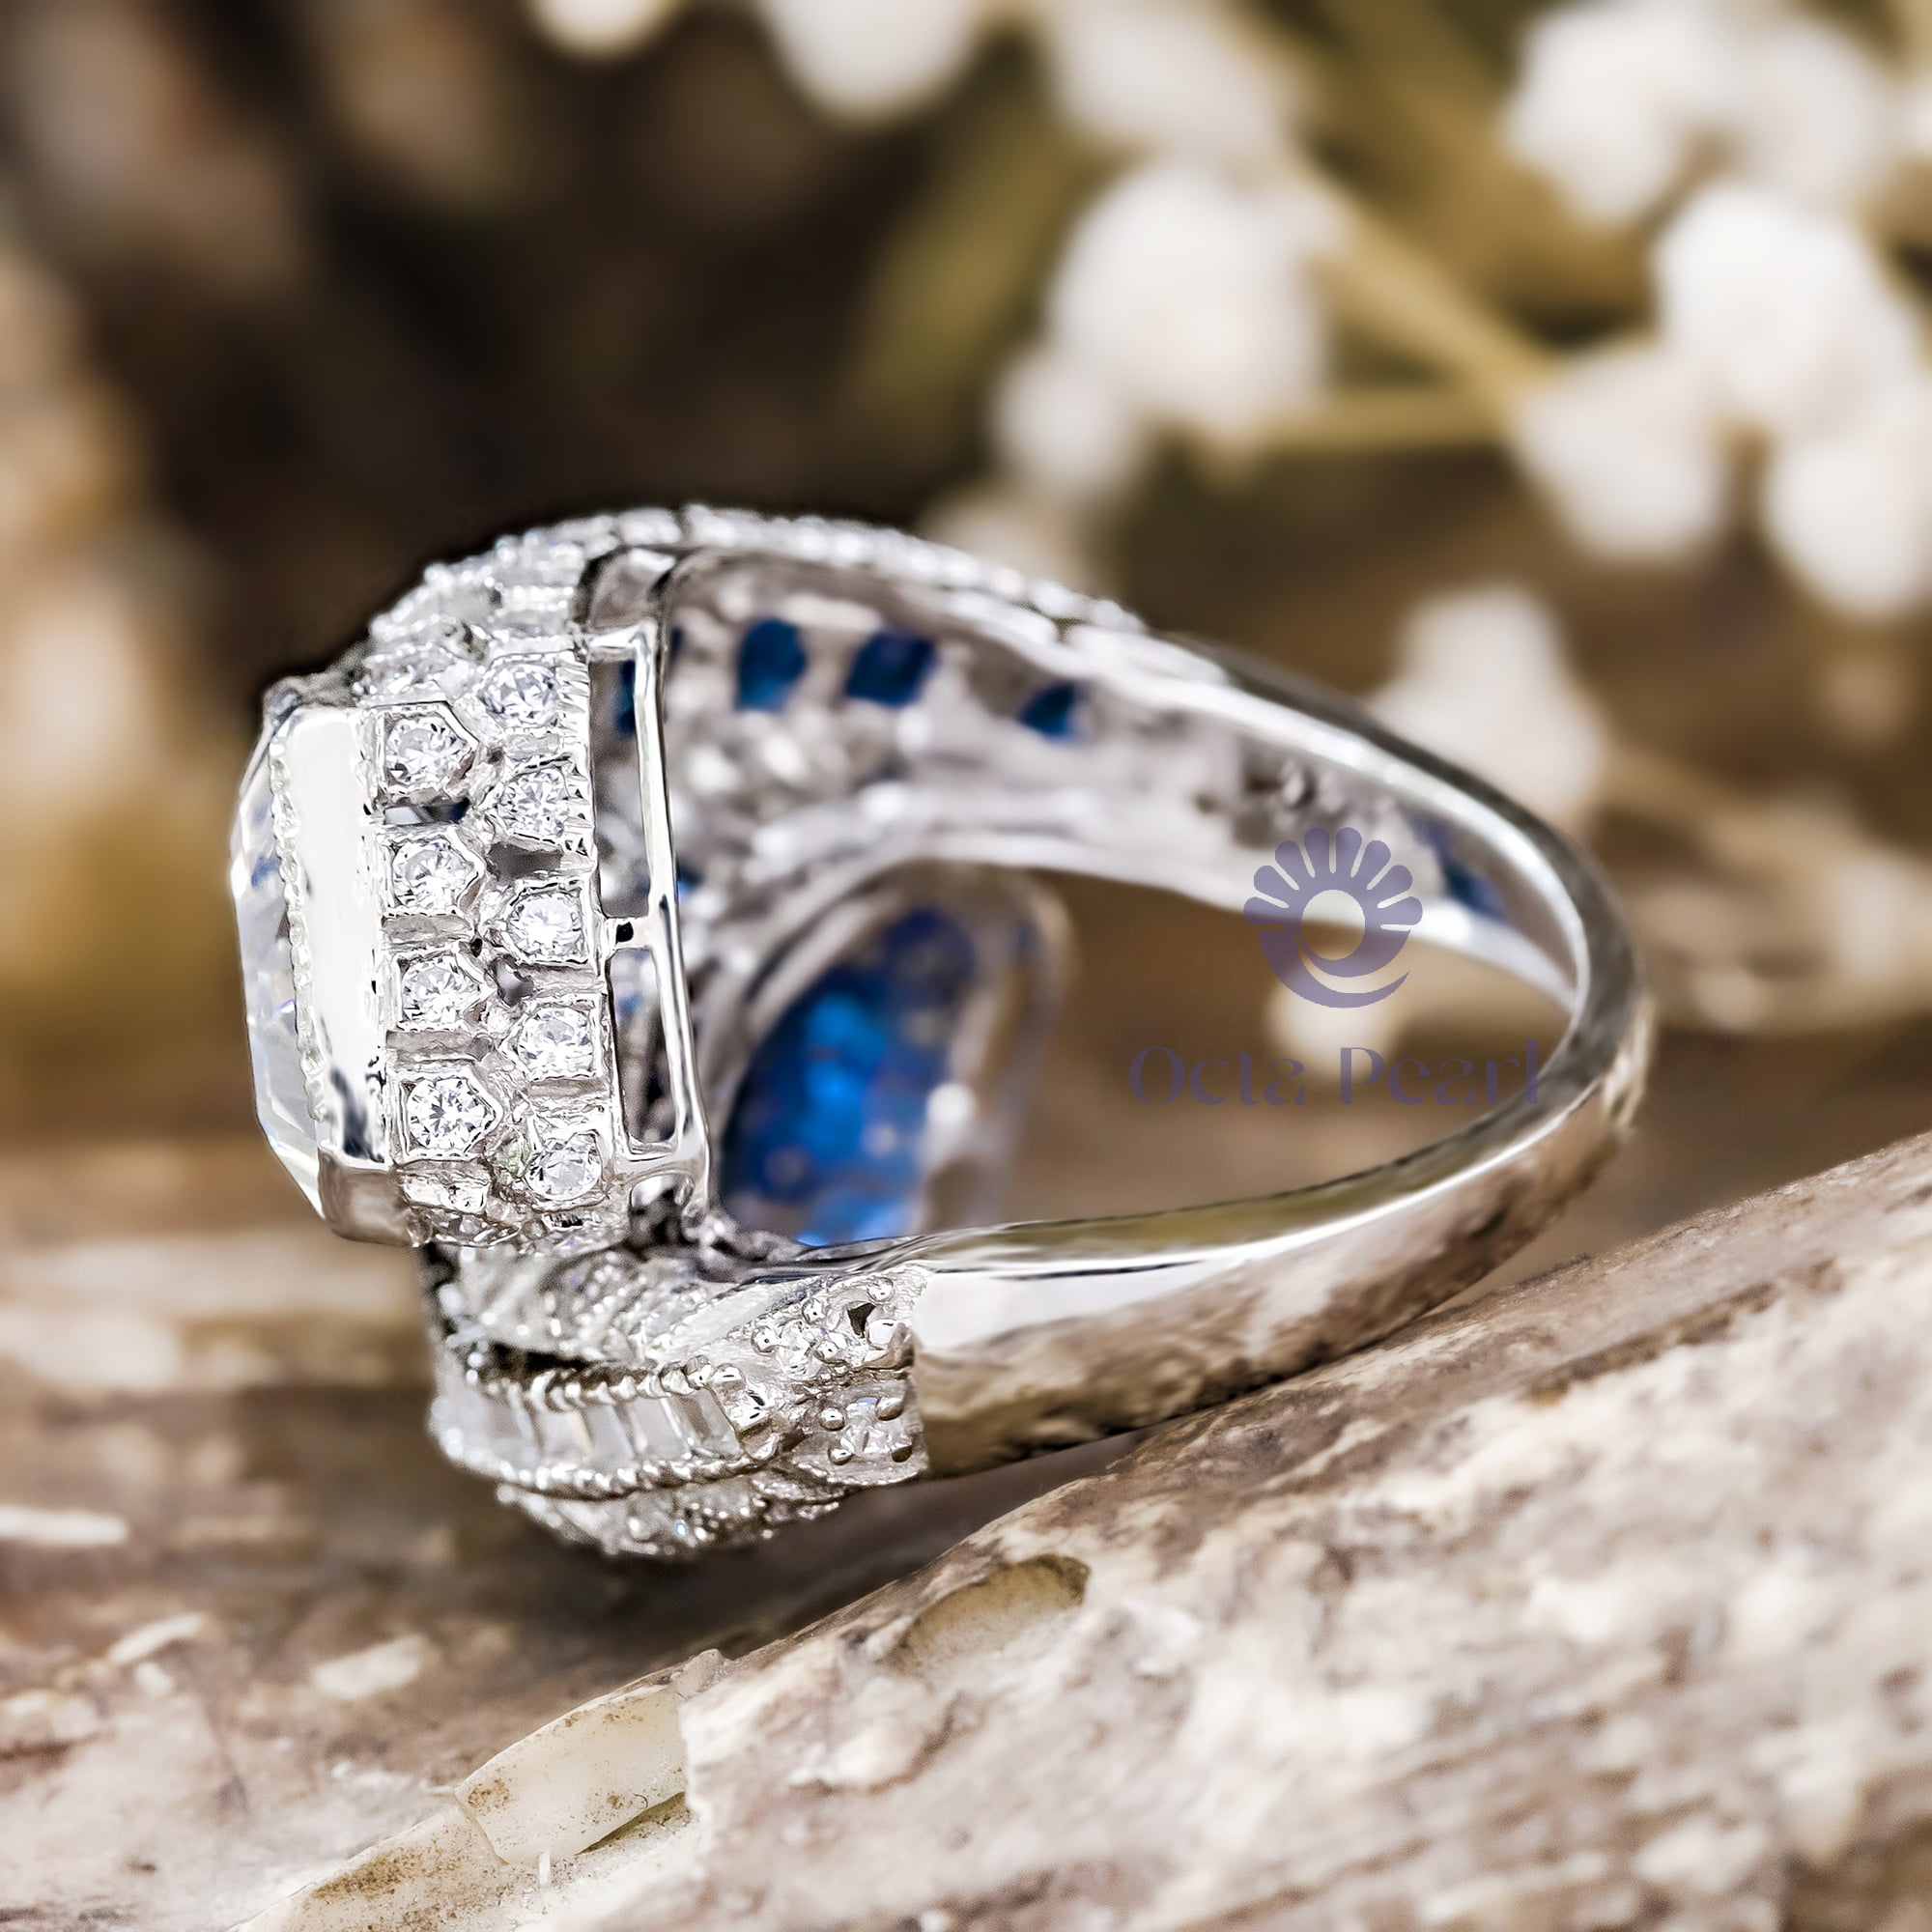 Blue Sapphire & White Fancy Cut With Baguette Cut CZ Stone Bypass Shank- Channel Setting Art Deco Ring